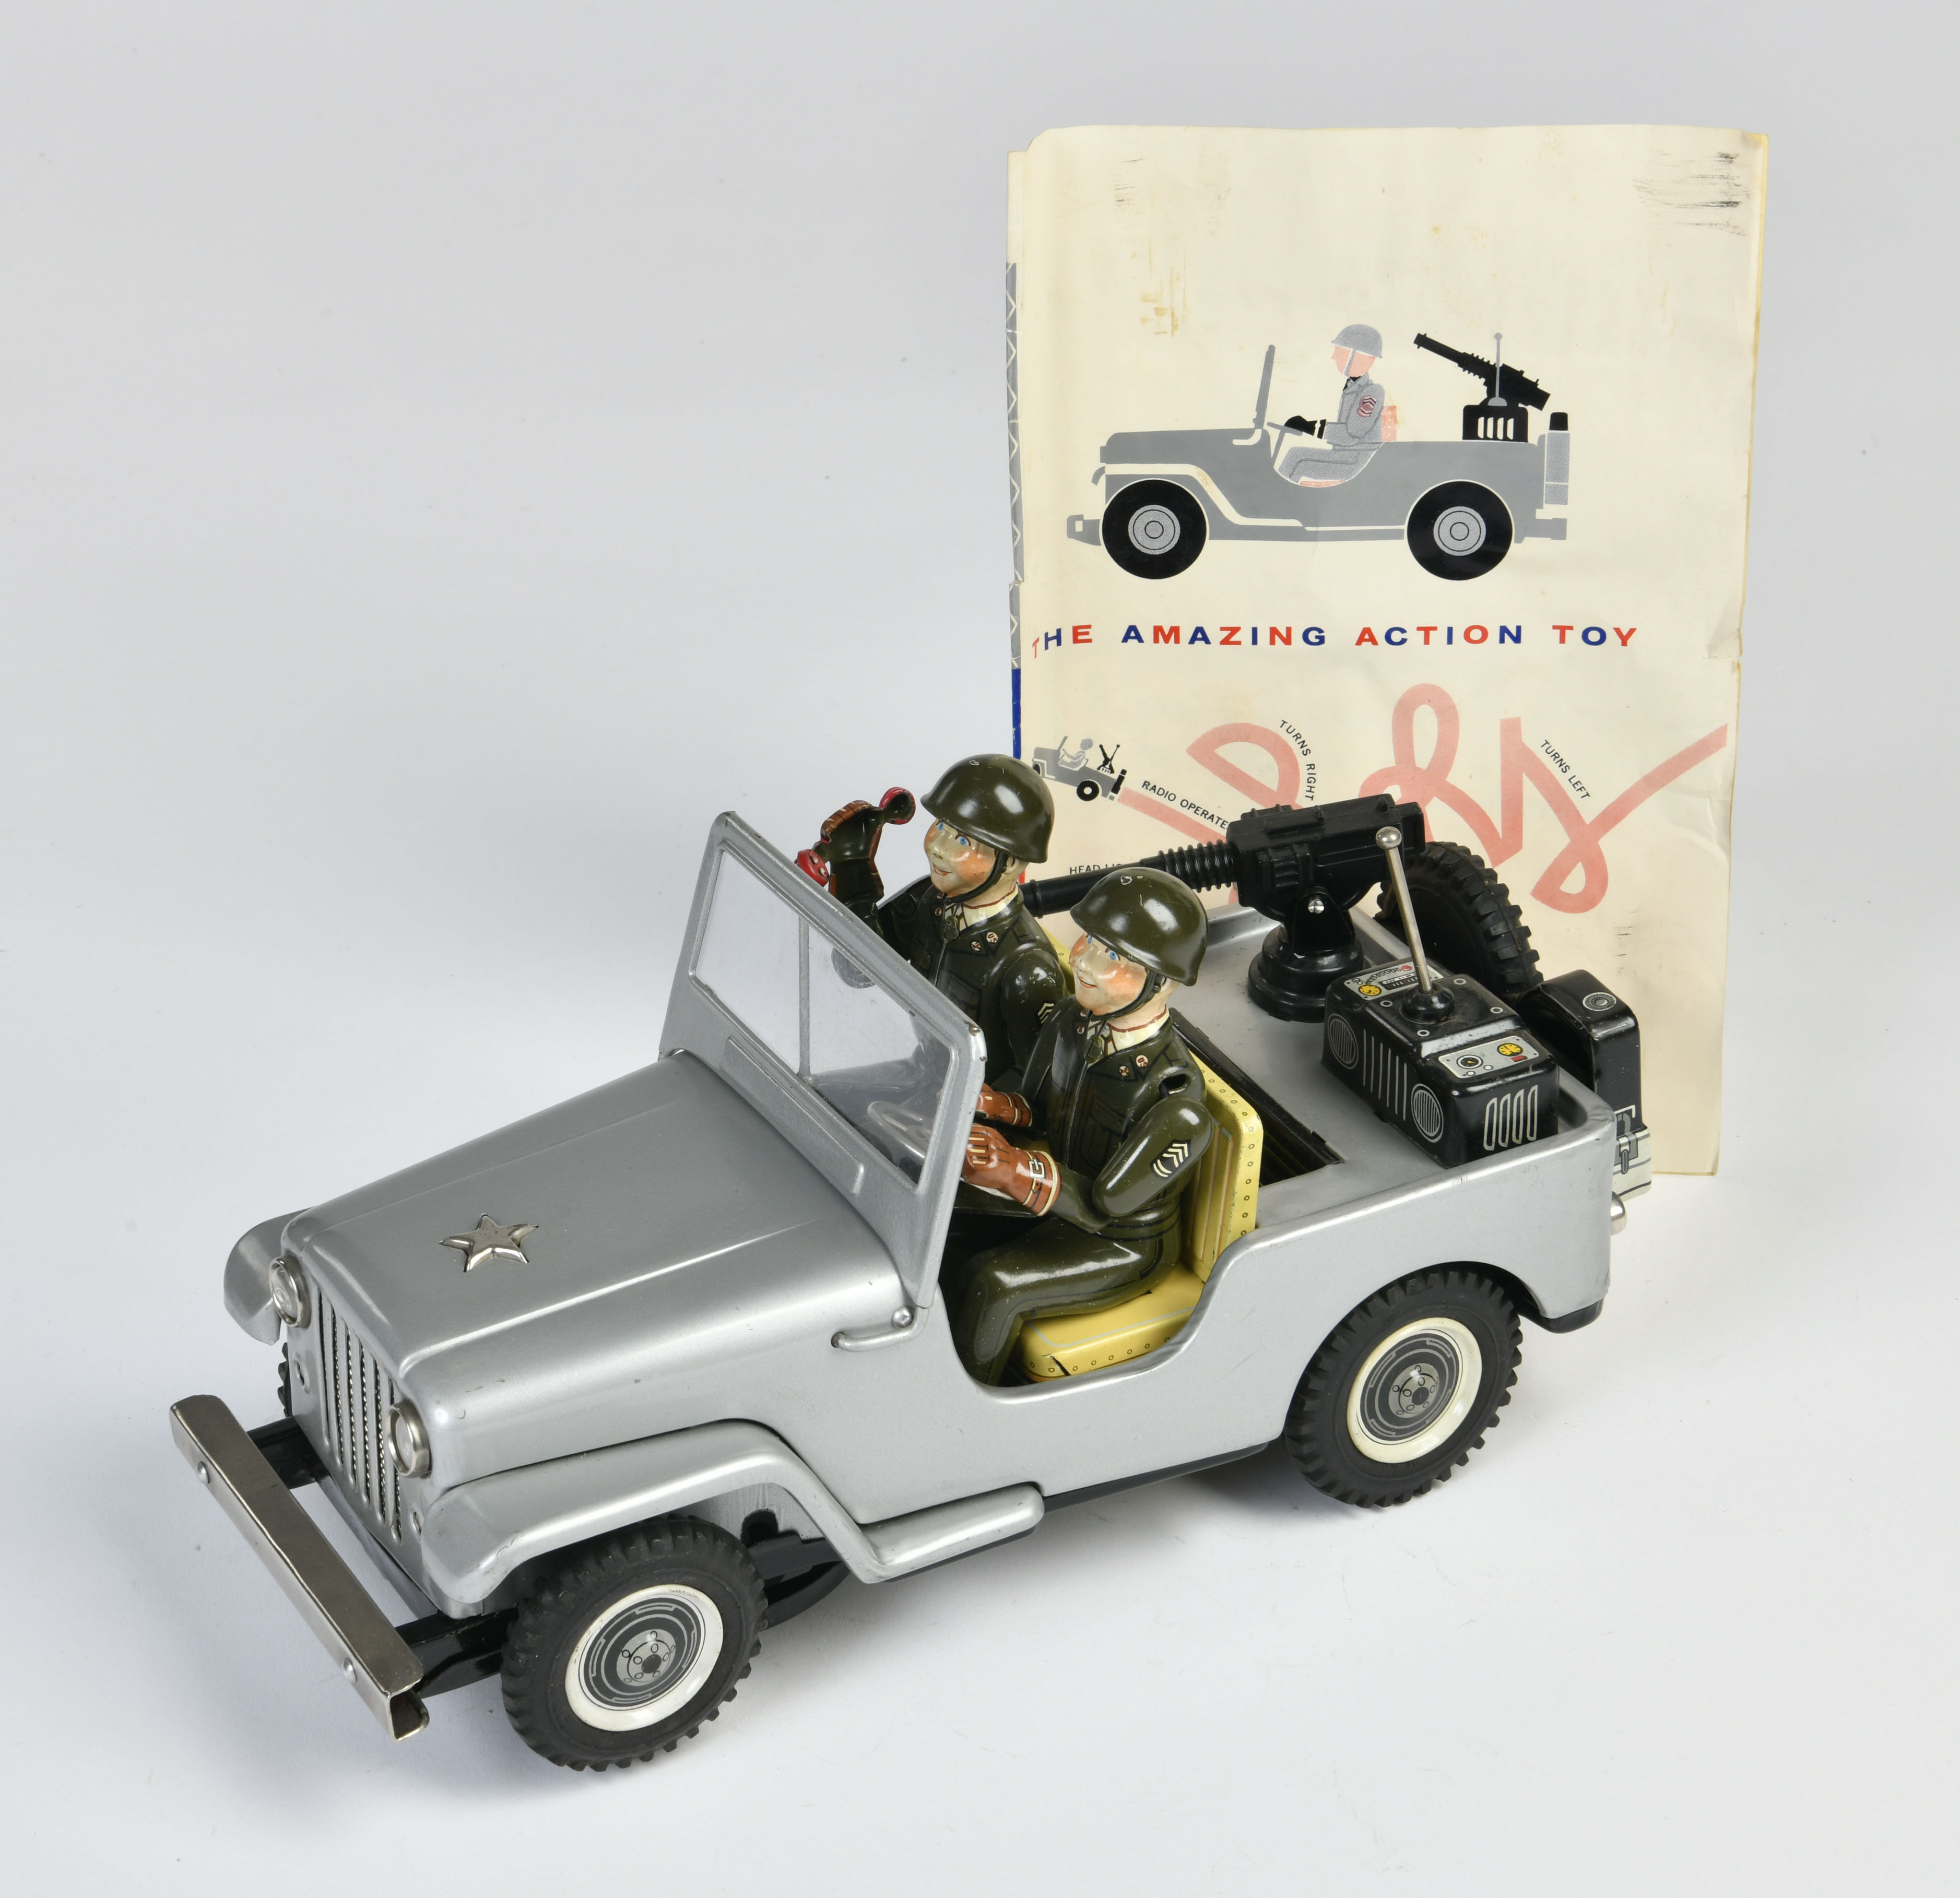 TN Nomura, Military Combat Jeep Silver Promotional Edition, was produced by TN for Kaiser company as